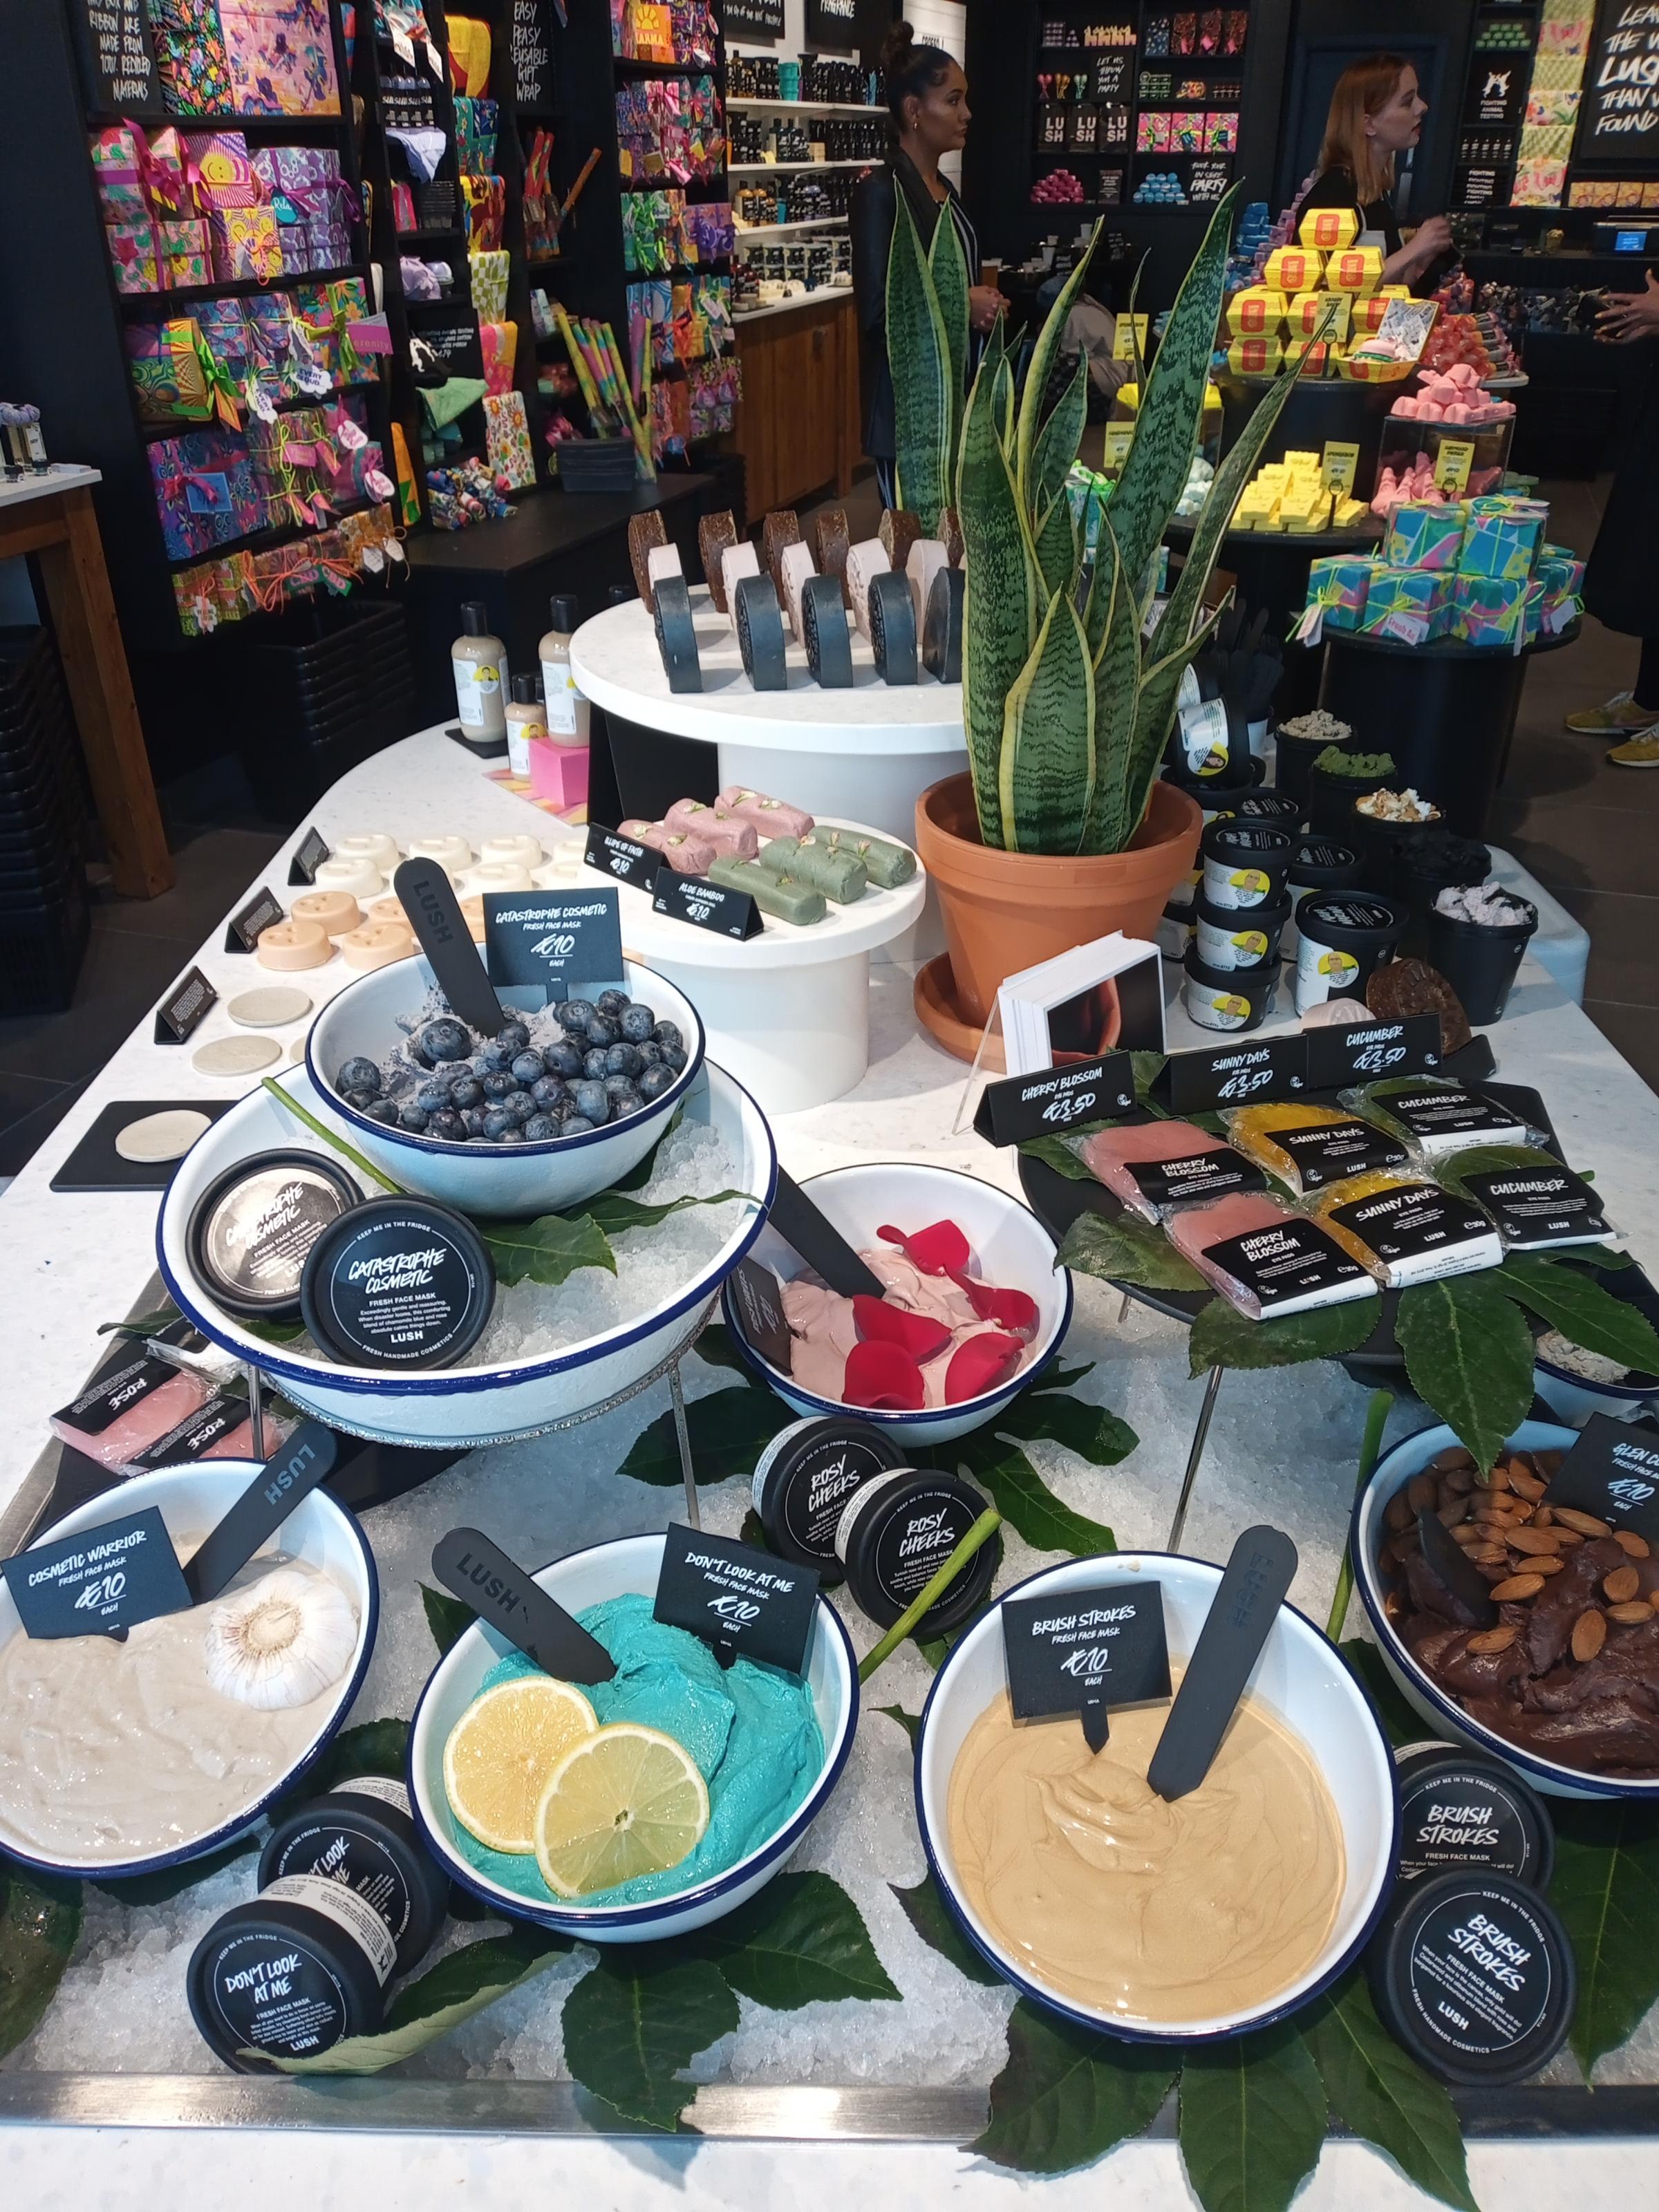 Its a hands-on experience at Lush Broughton.